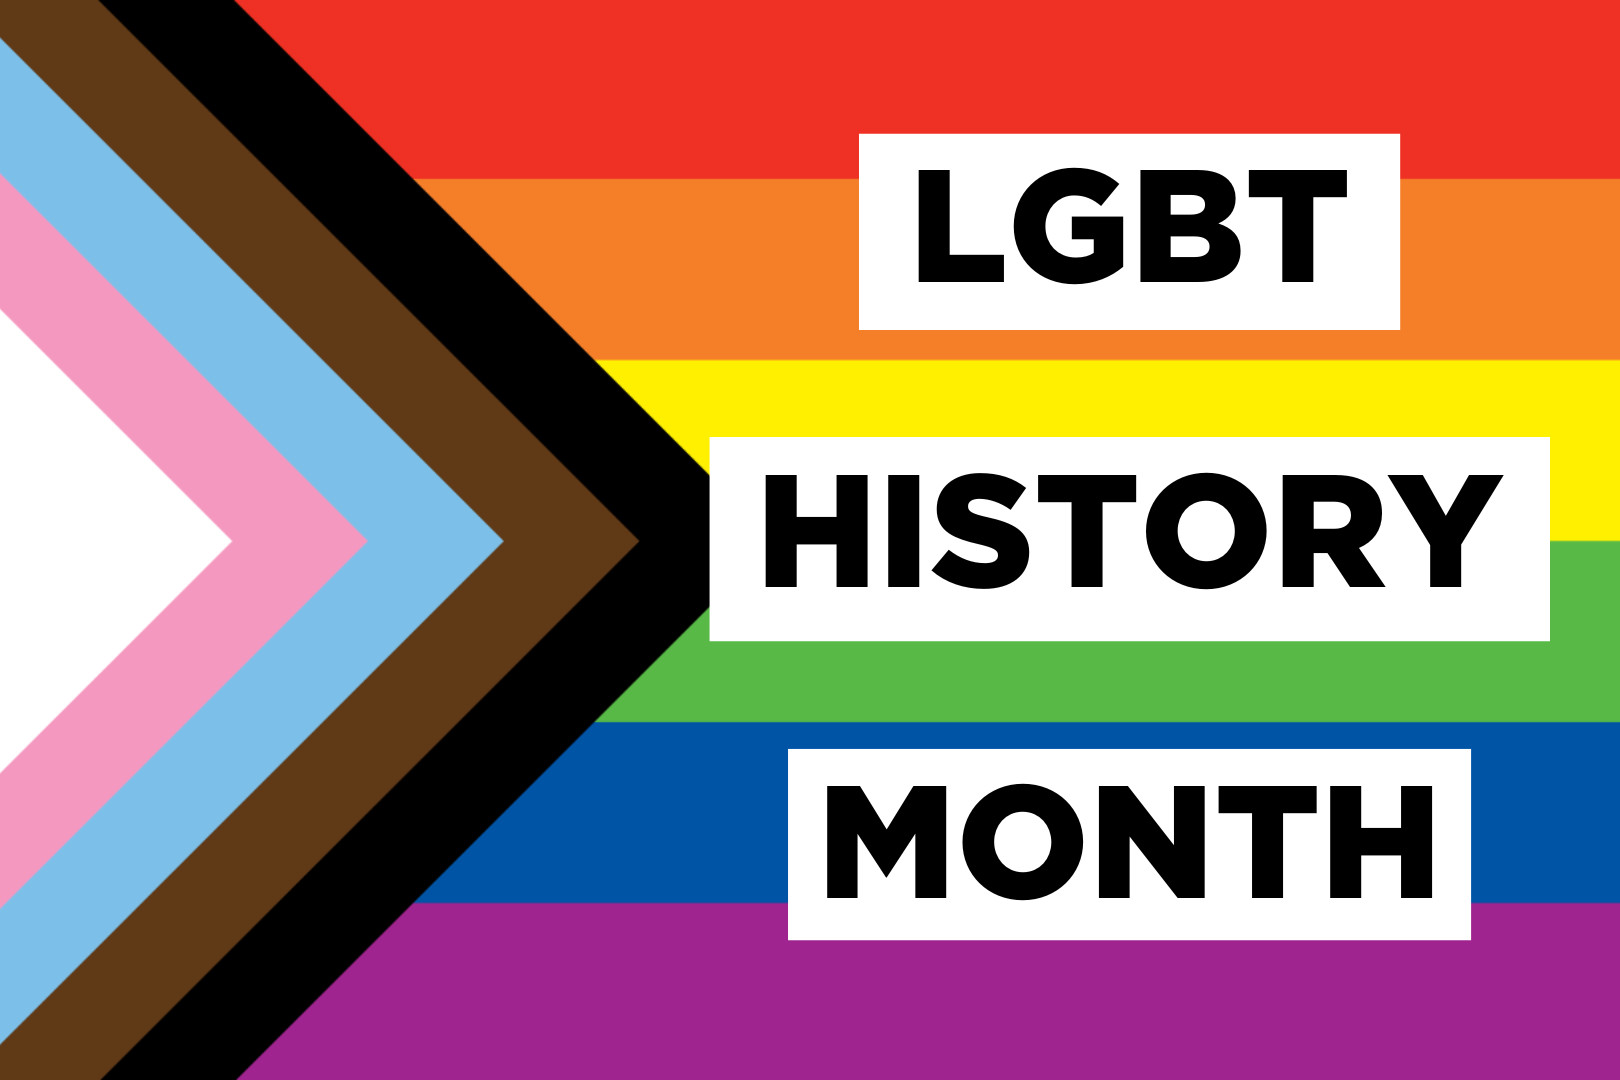 LGBTQ+ rainbow flag with text 'lgbt history month'